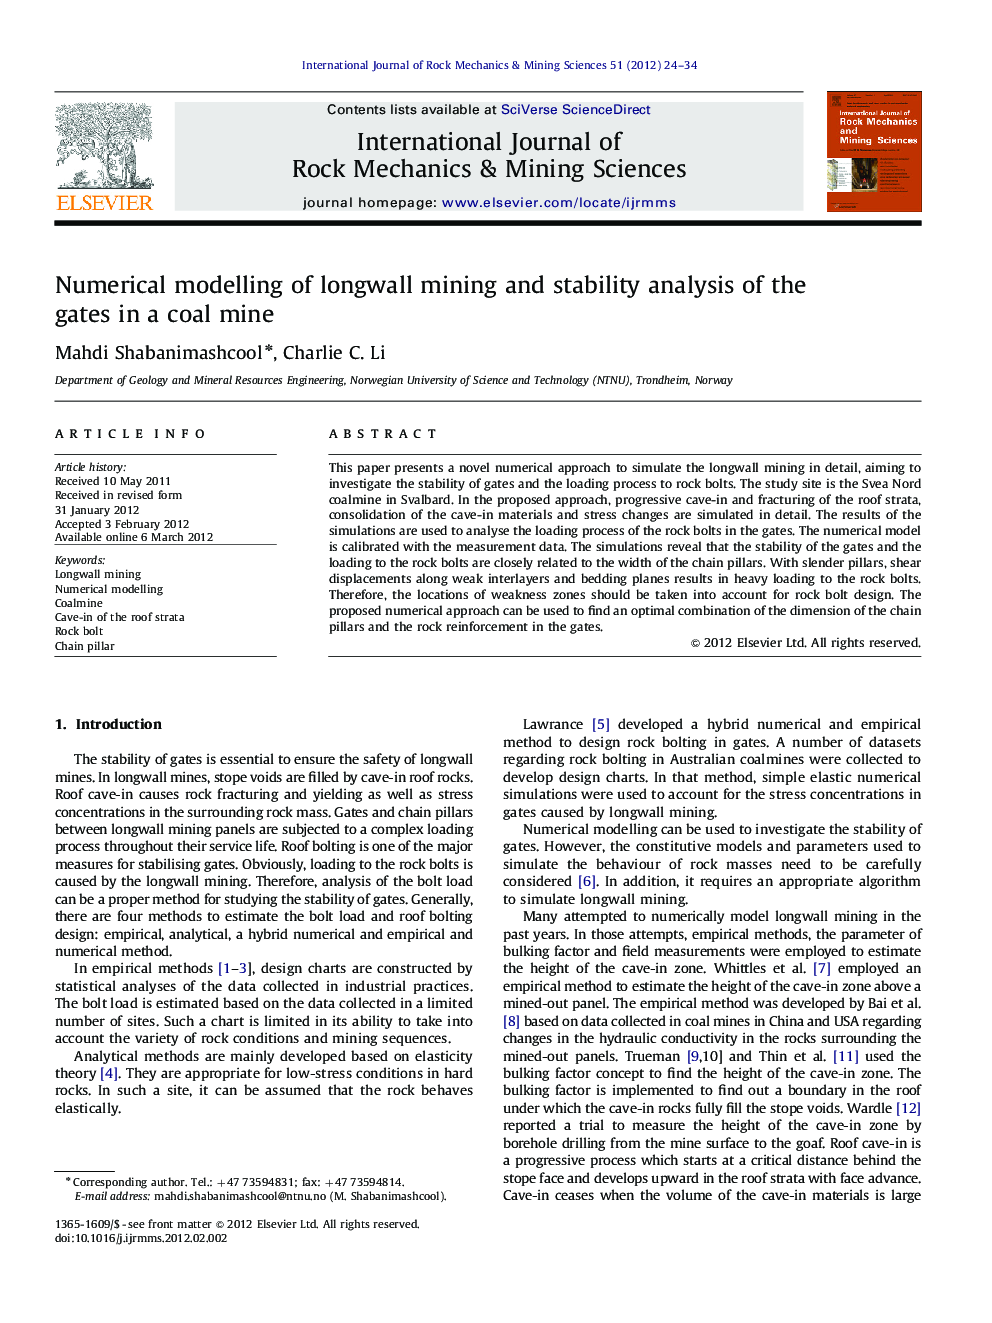 Numerical modelling of longwall mining and stability analysis of the gates in a coal mine